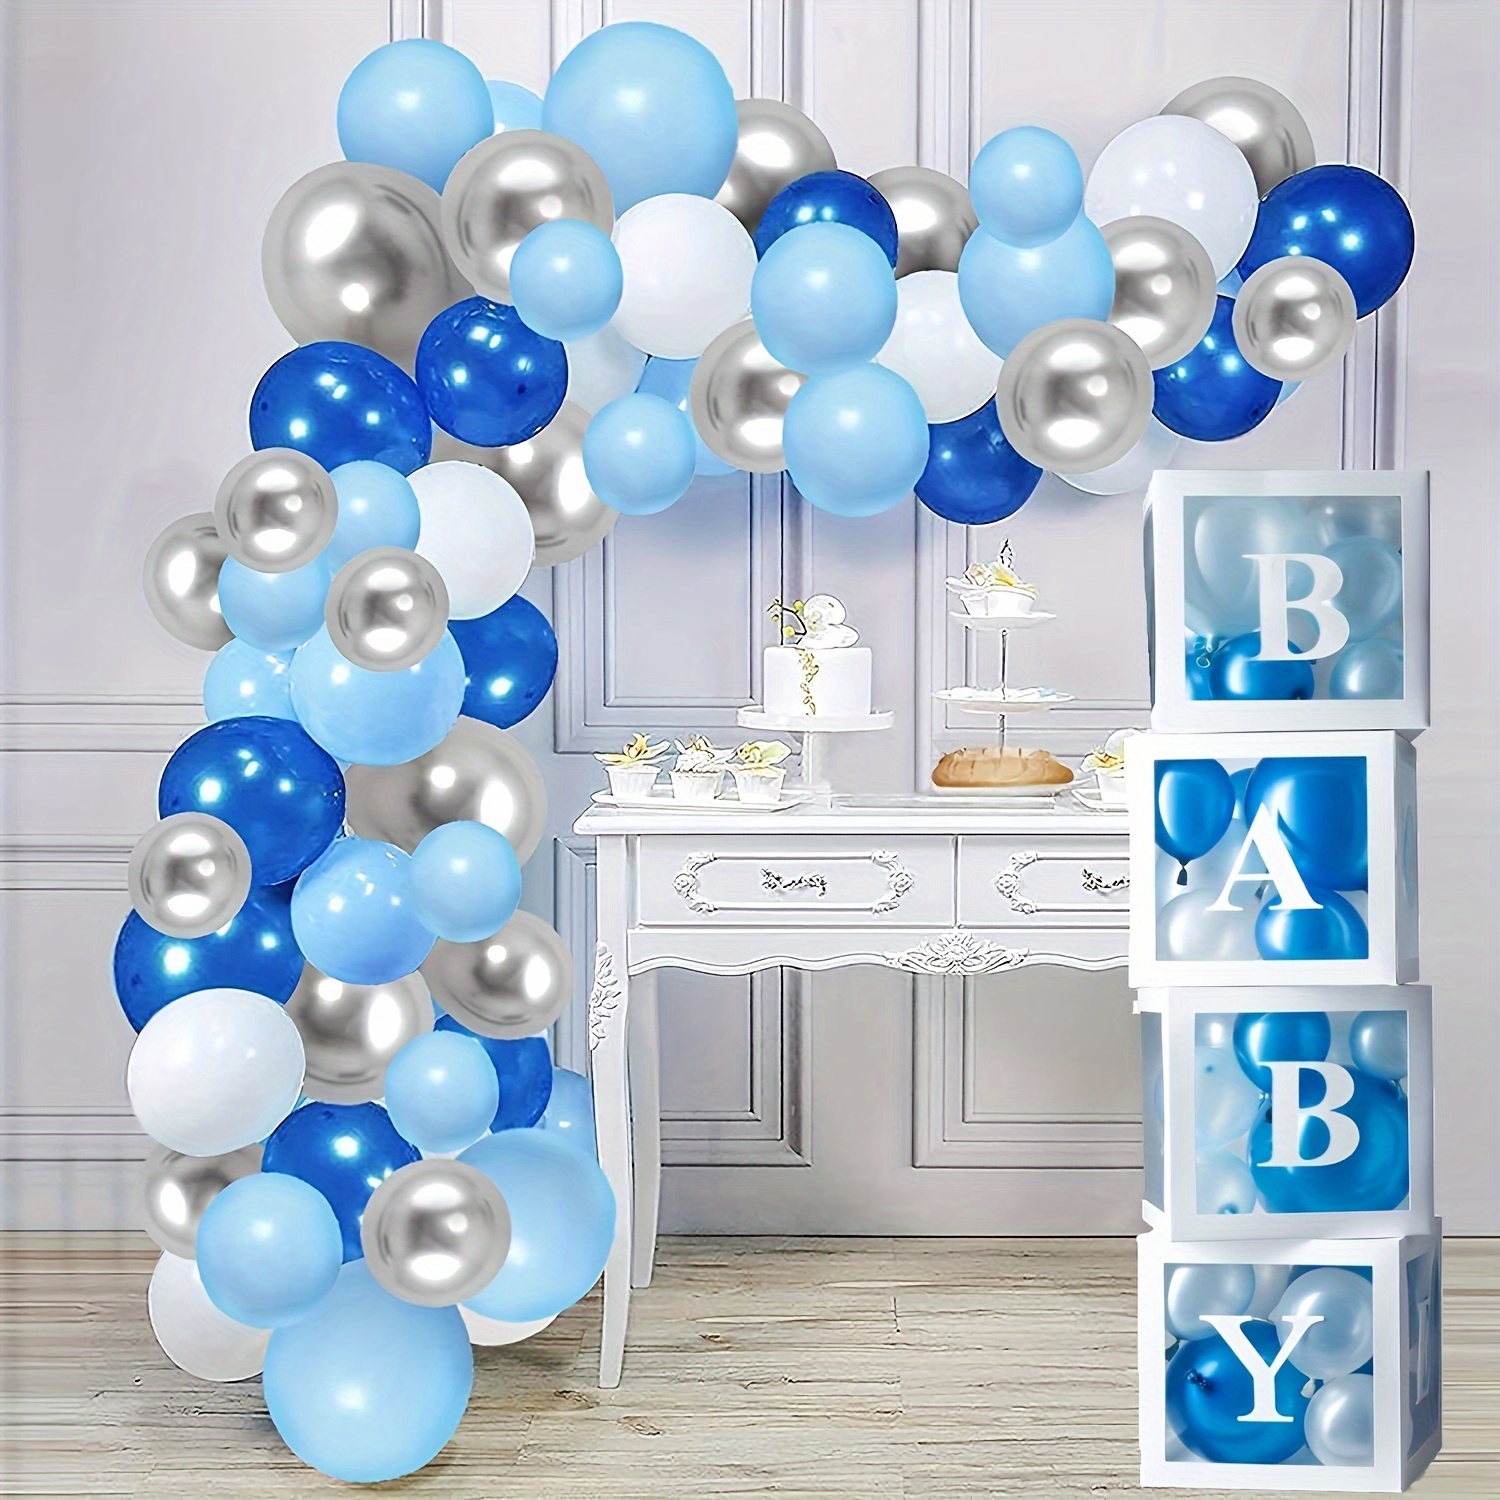  Baby Boxes Gender Reveal Balloon Decorations Kit With